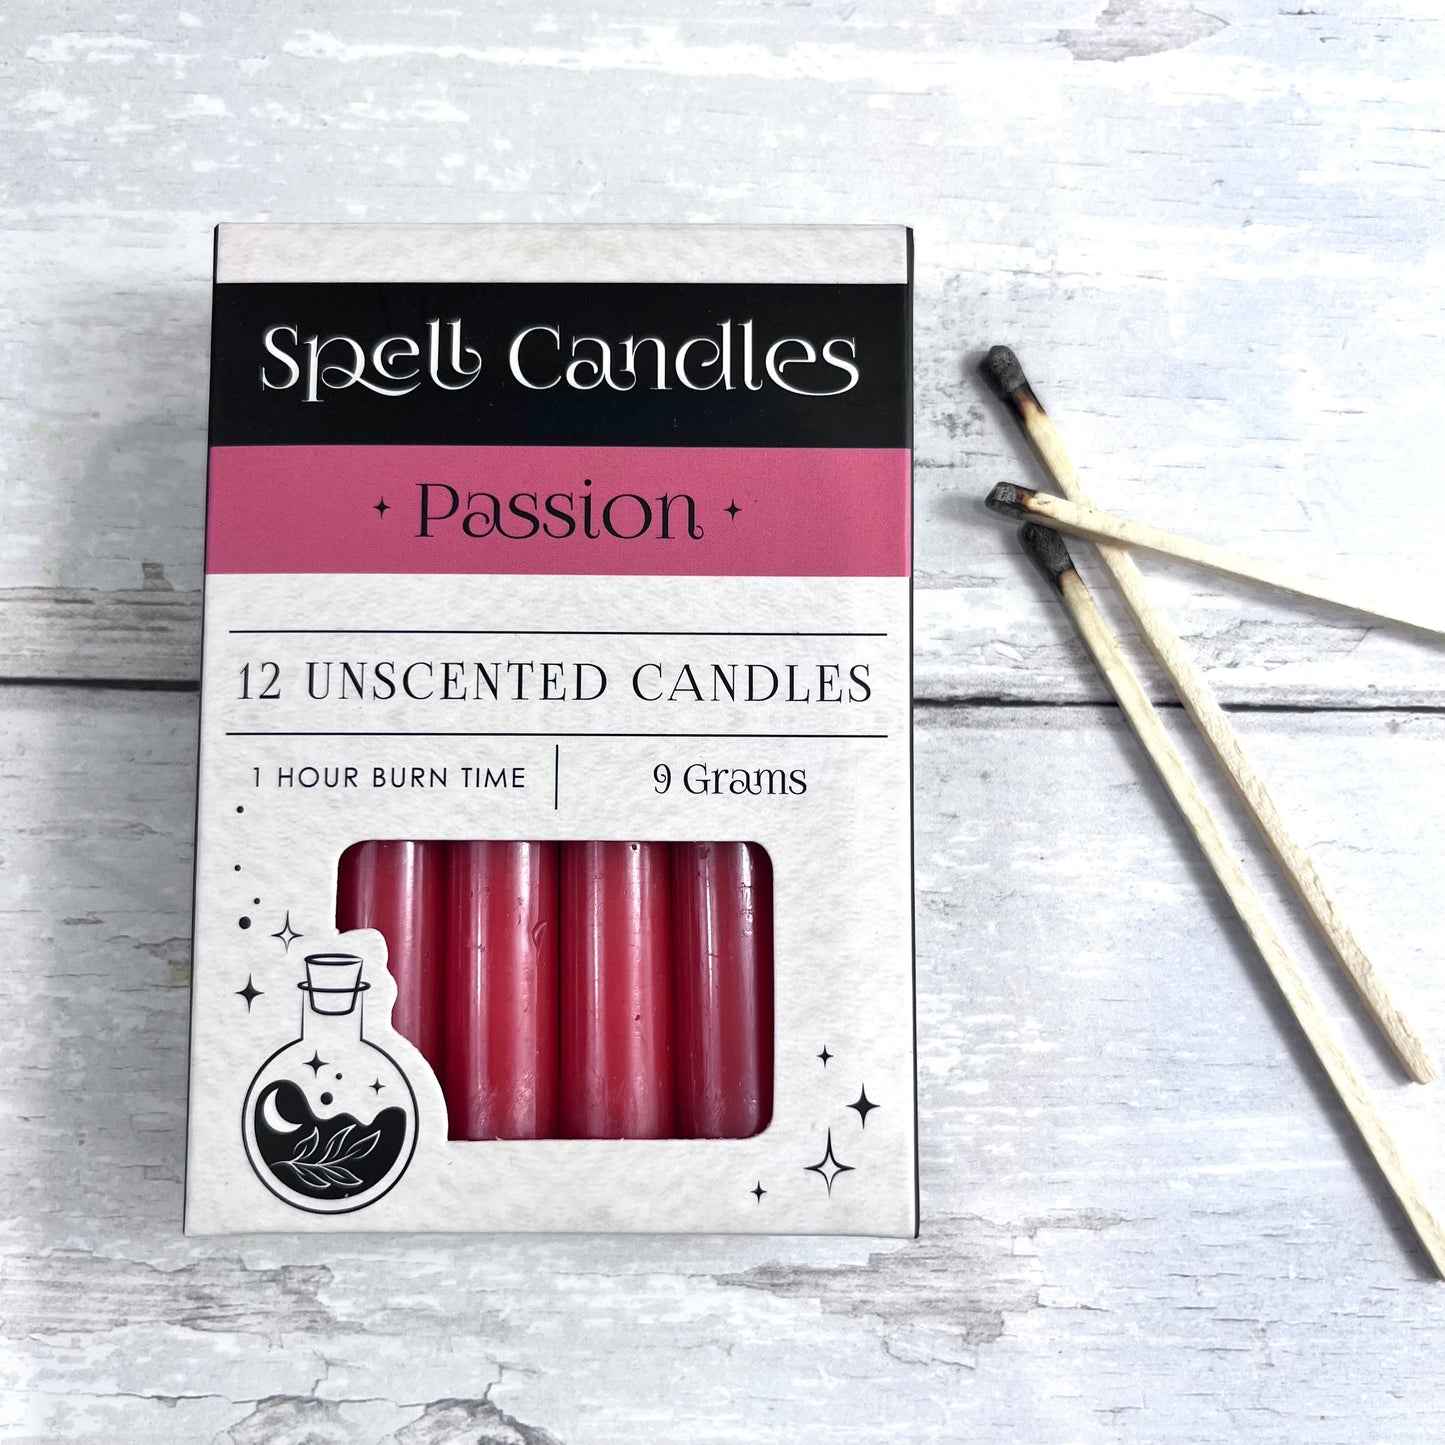 Passion Spell Candles